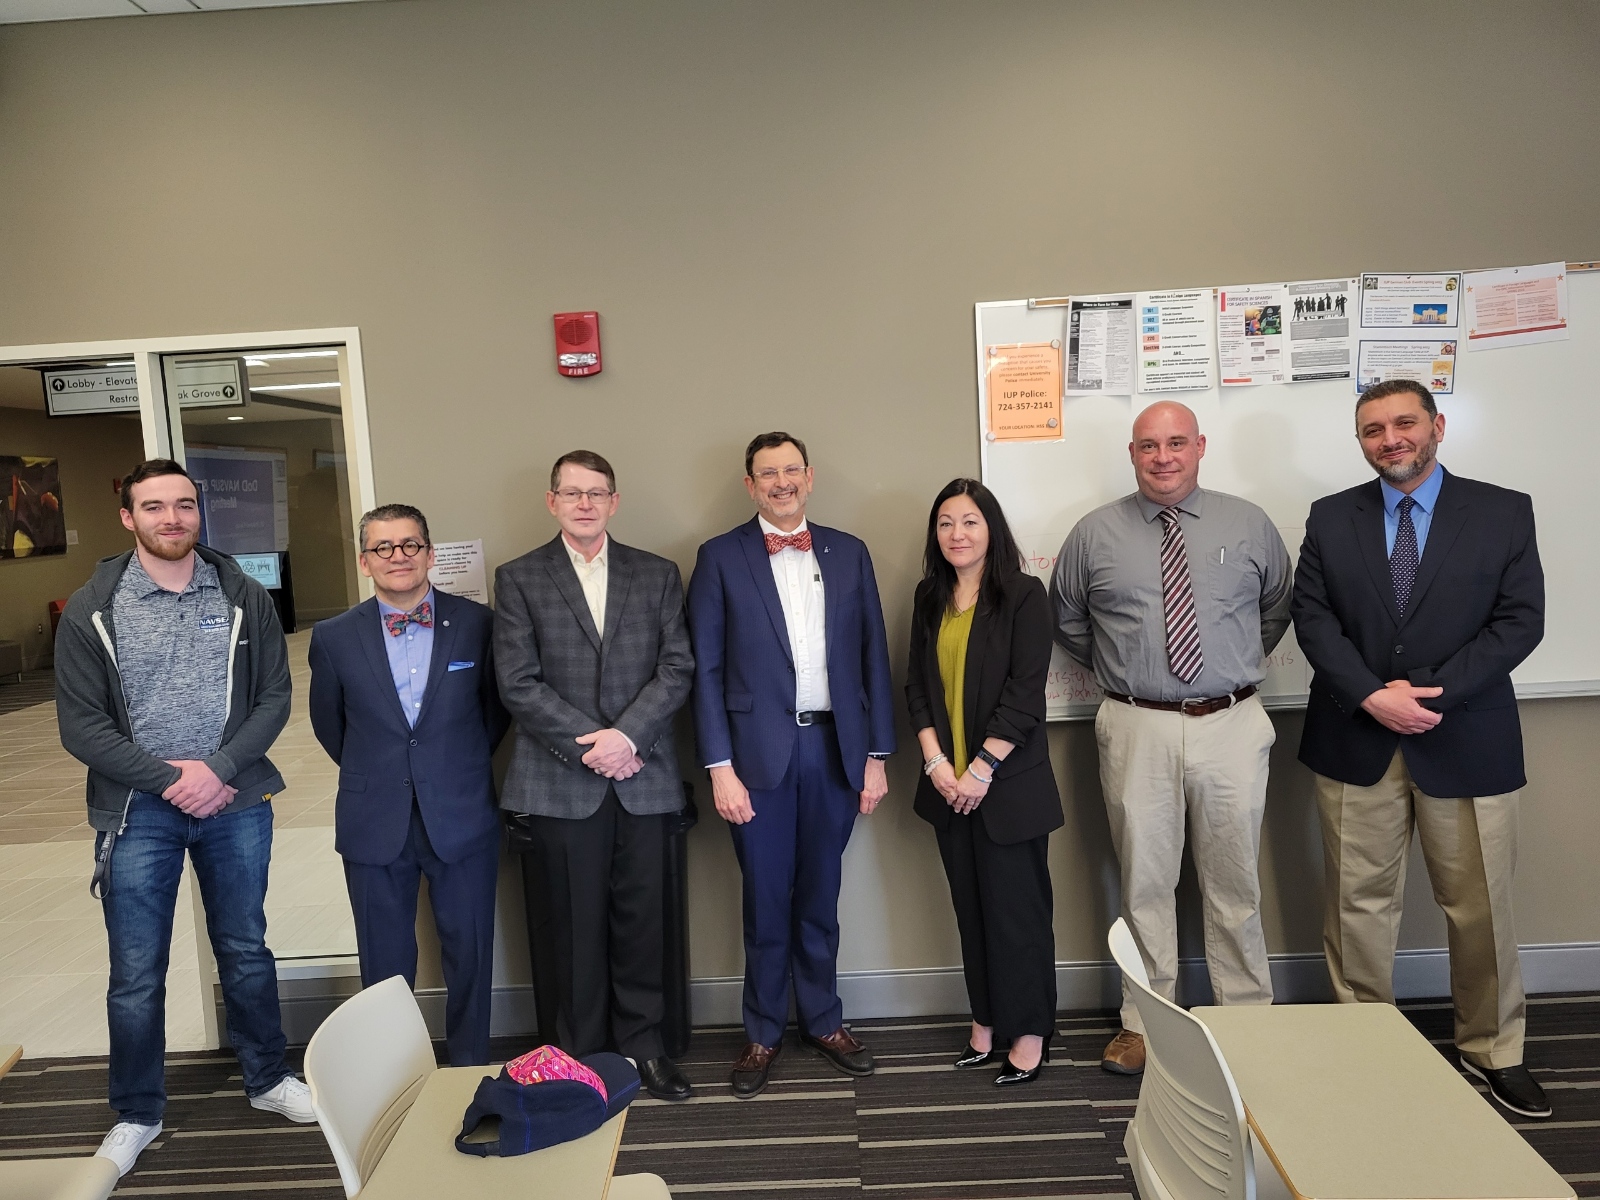 Participants in the DoD NAVSUP Visit to IUP